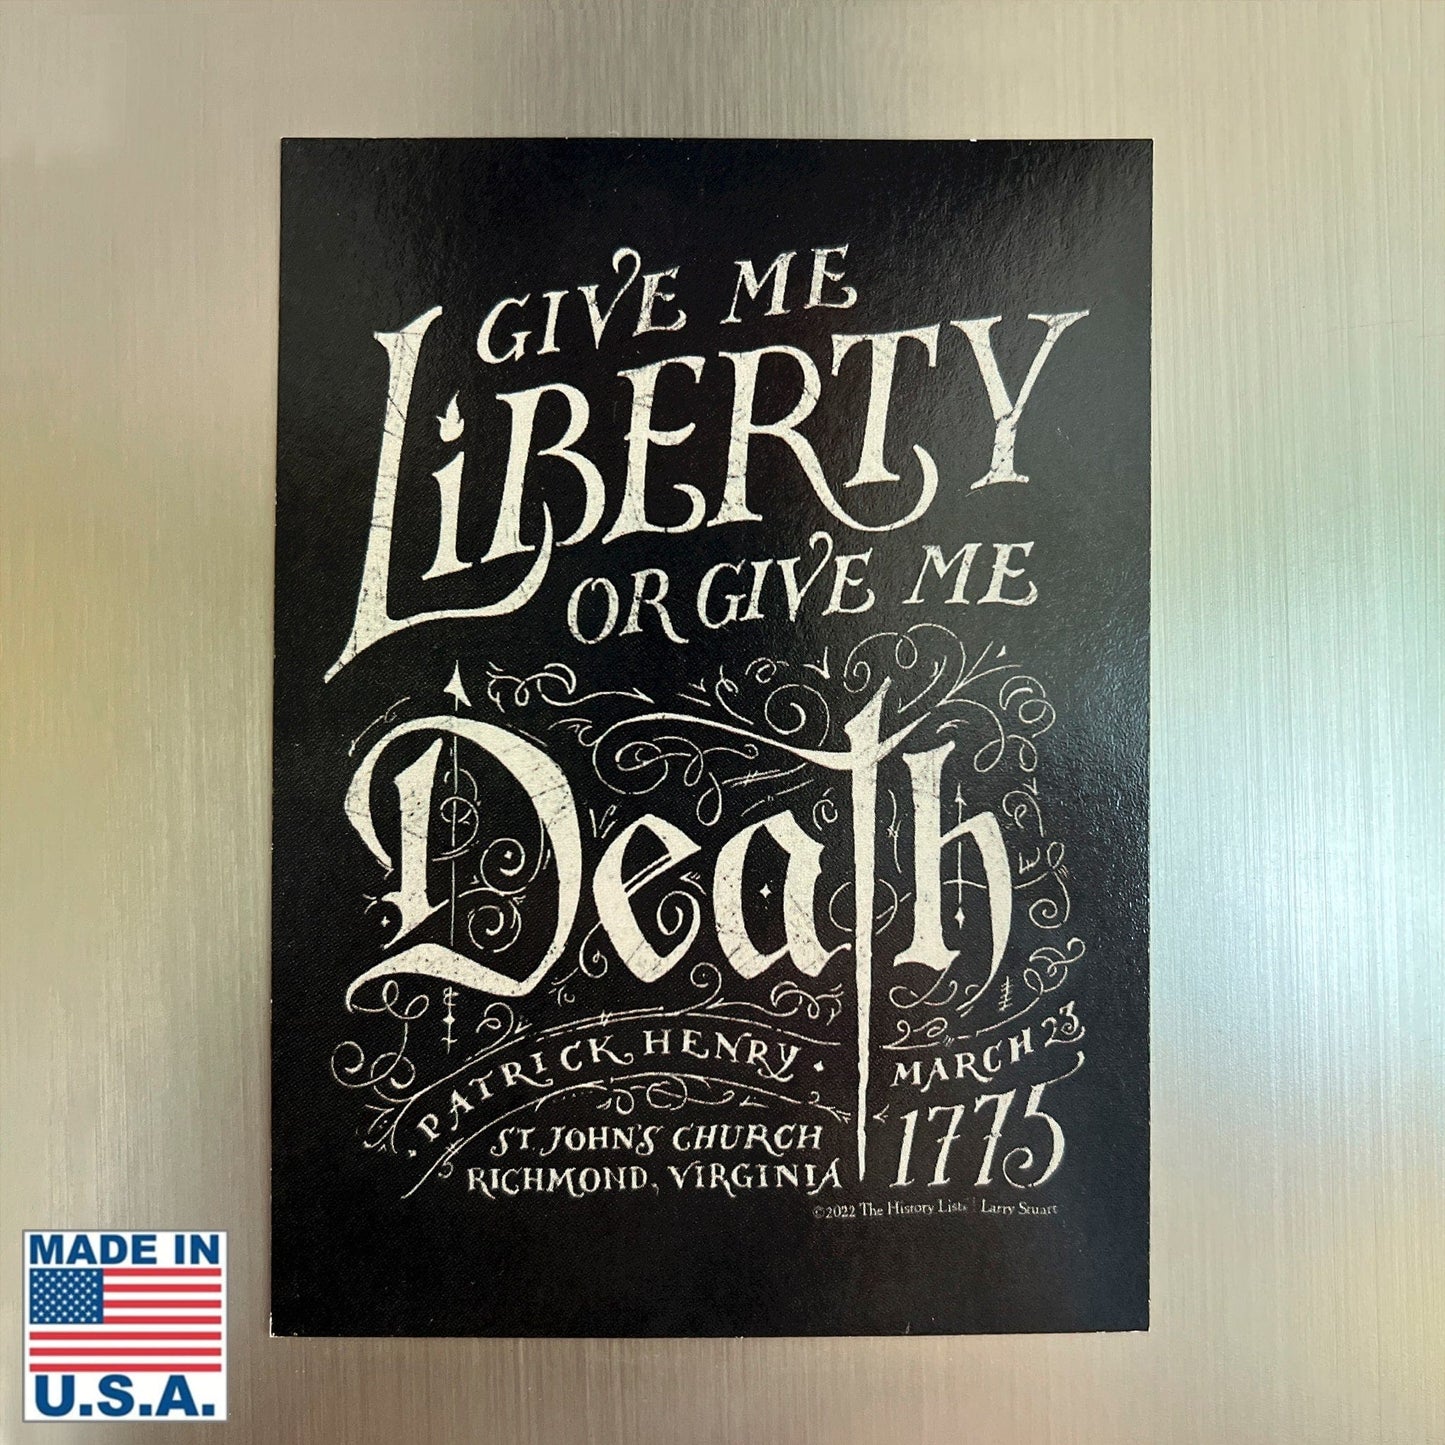 "Give me liberty, or give me death!" Magnet from the History List Store